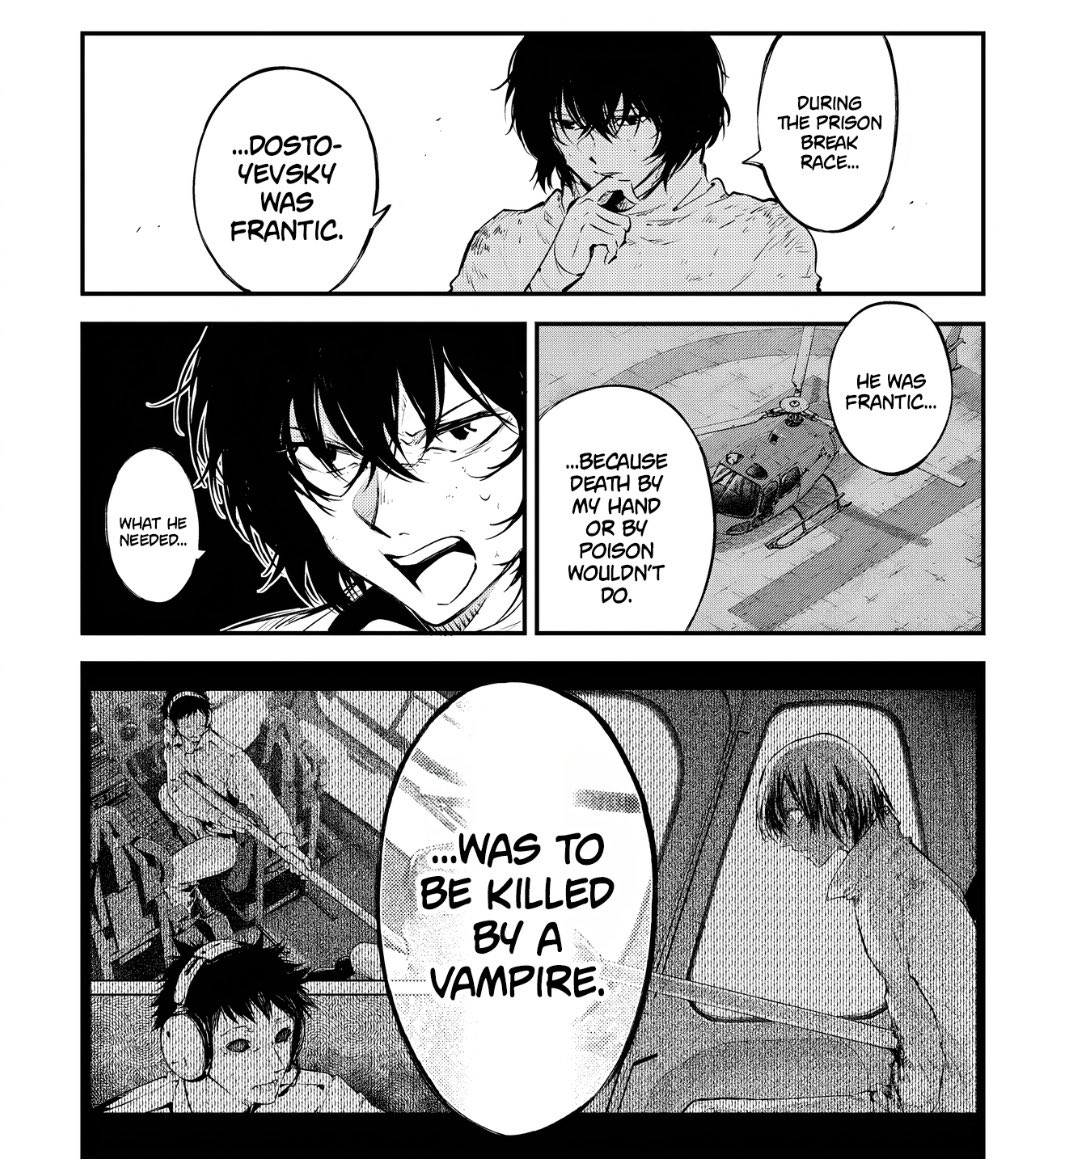 this is crazy fyodor planned all of this out and dazai figured it out in SECONDS